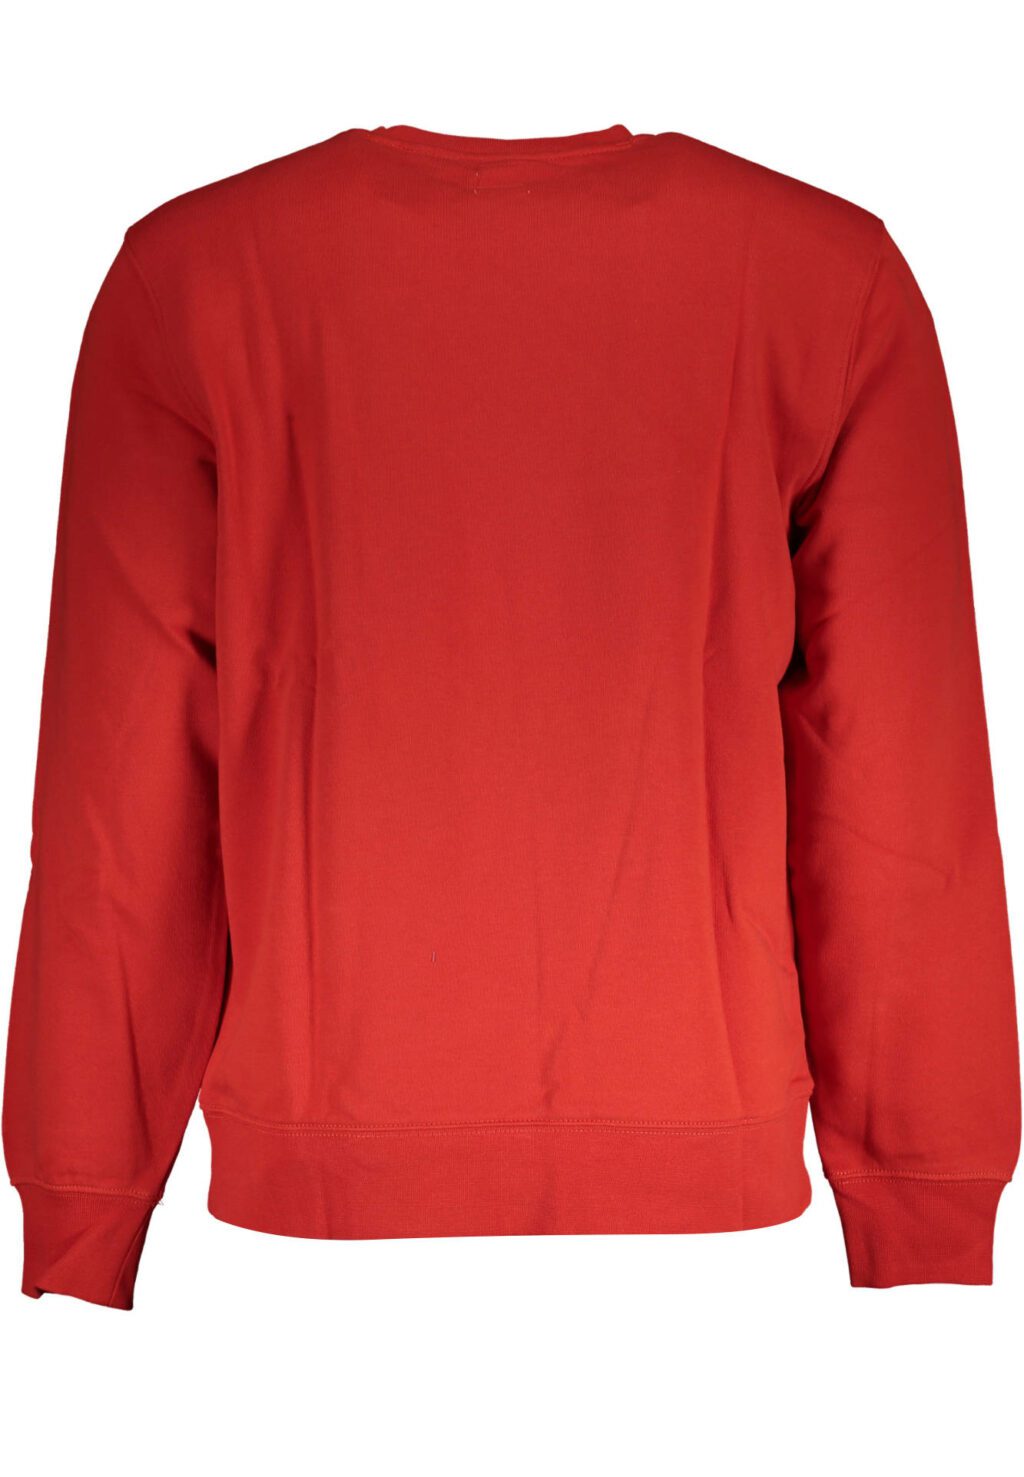 LEVI'S SWEATSHIRT WITHOUT ZIP MAN RED 35909_ROSSO_0023